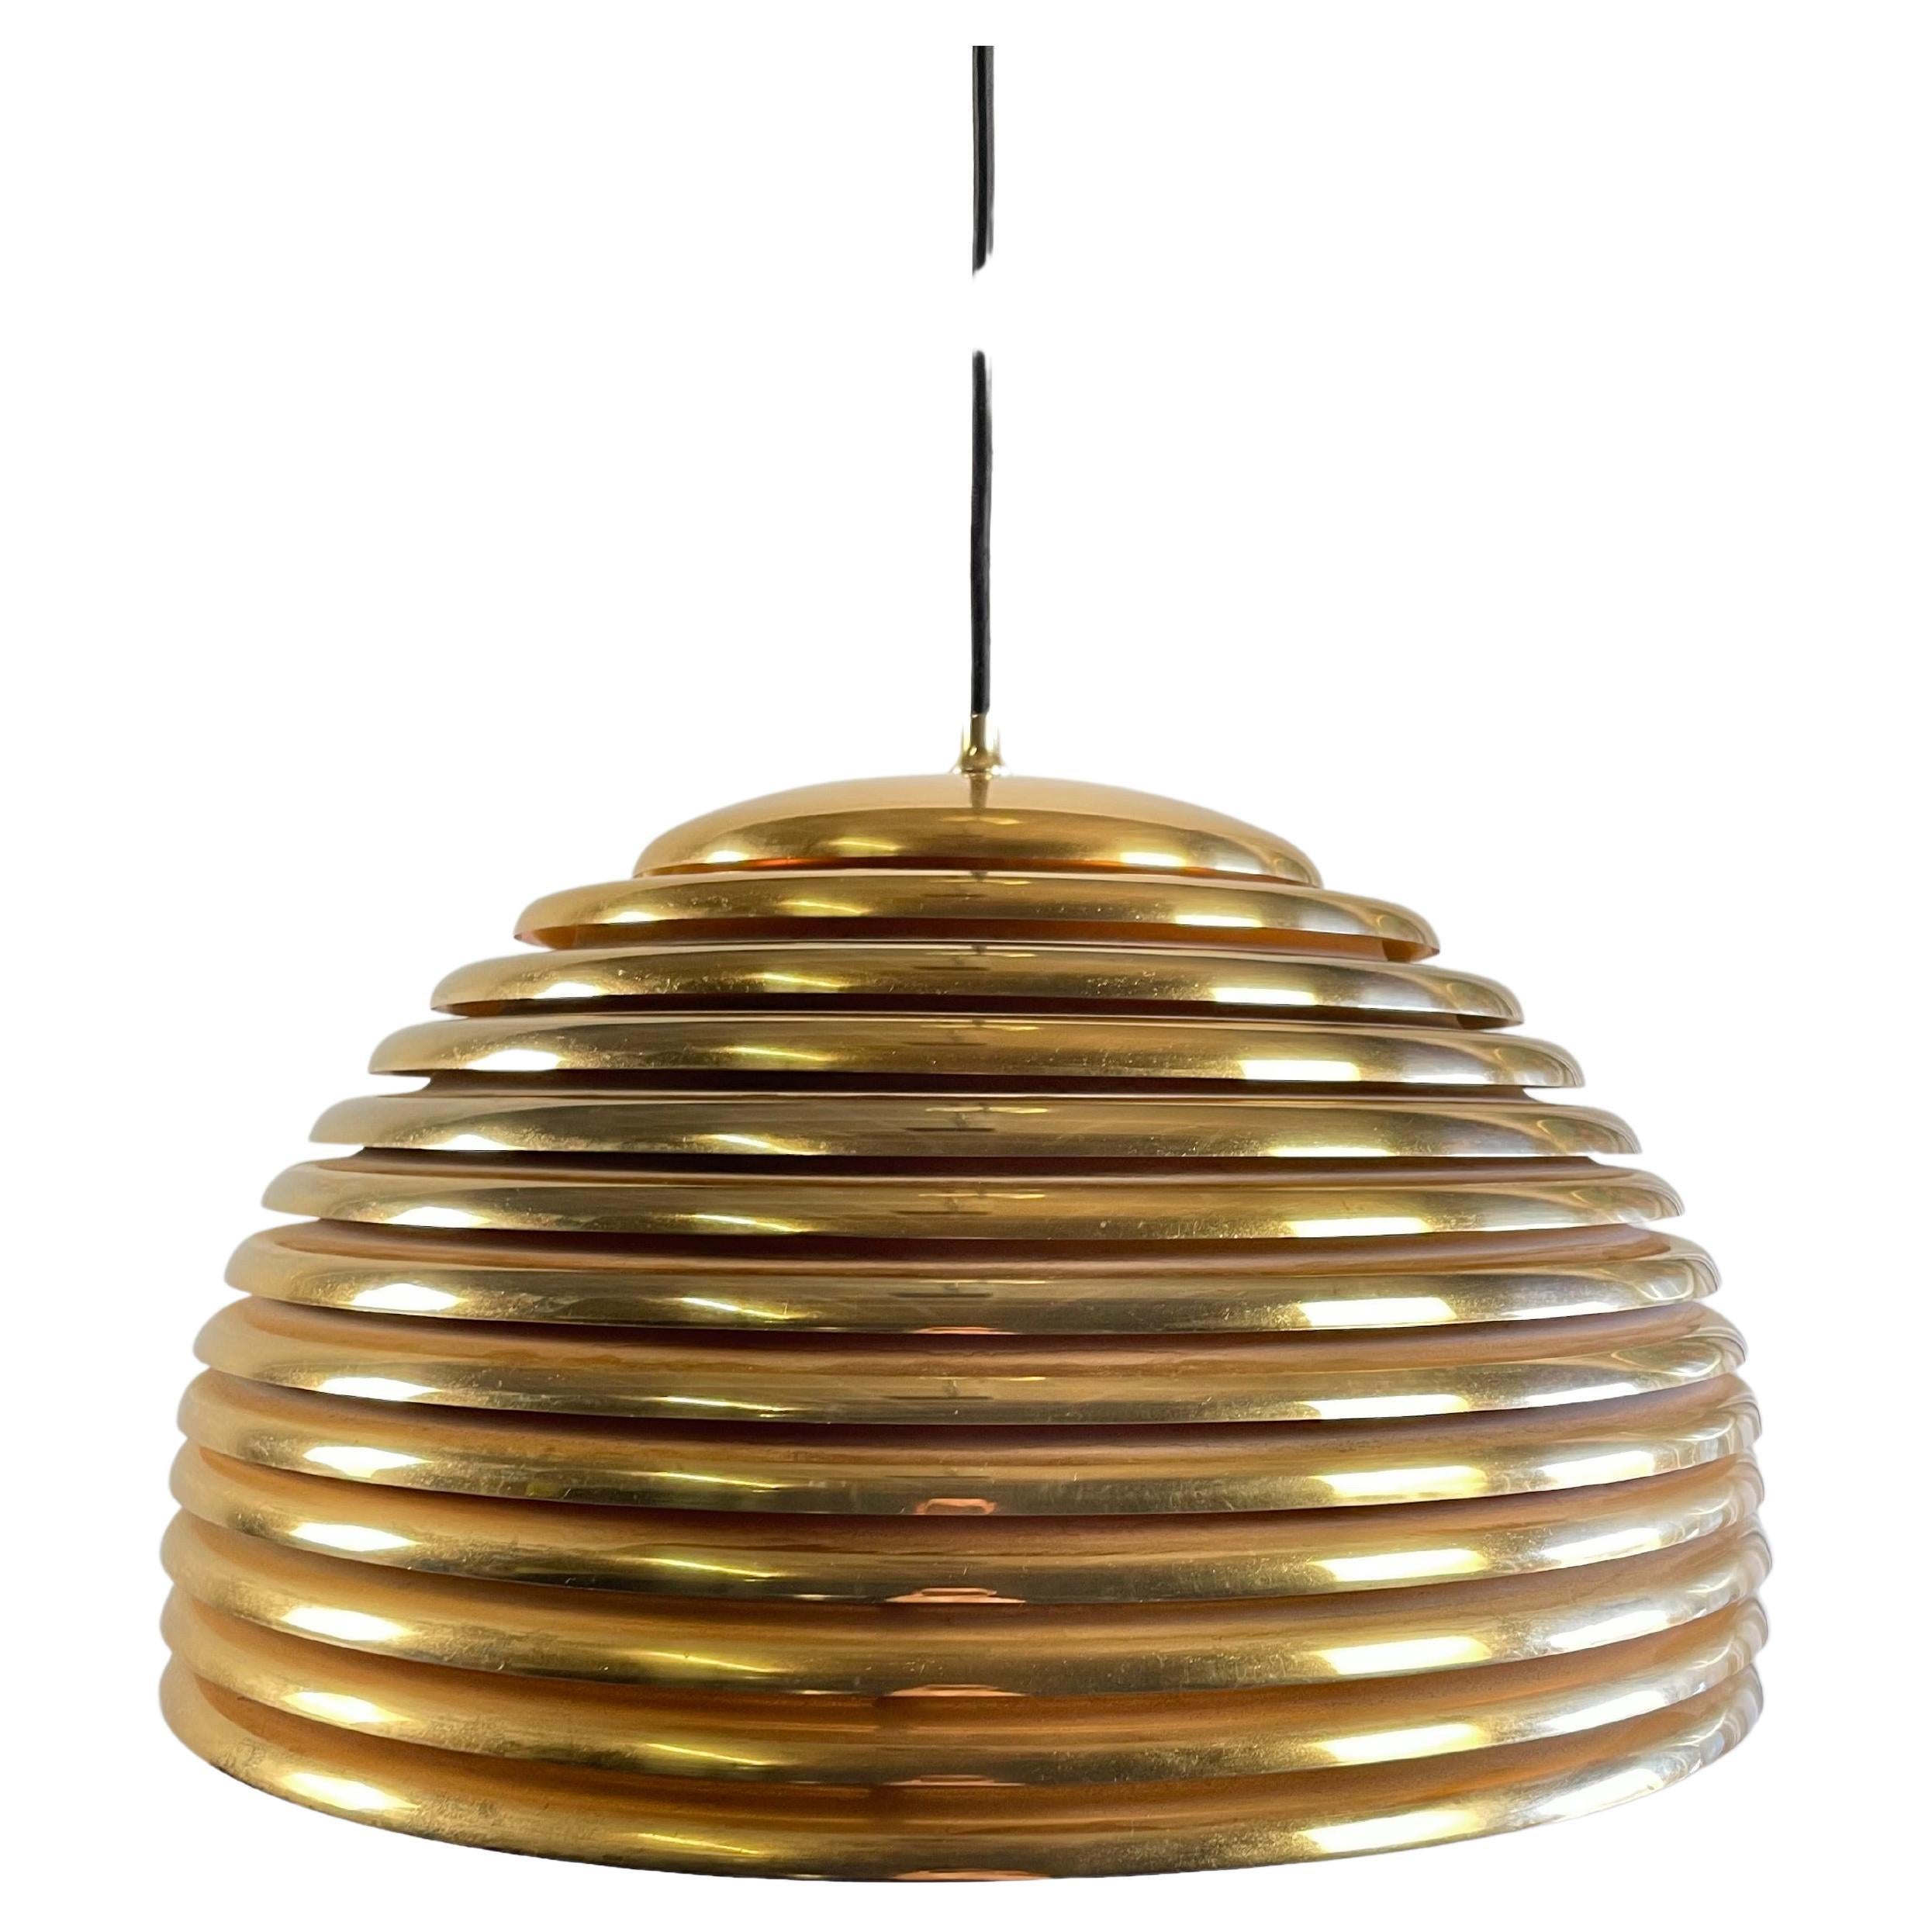 Rare Large Brass / Golden Saturno Pendant Lamp by Kazuo Motozawa for Staff For Sale